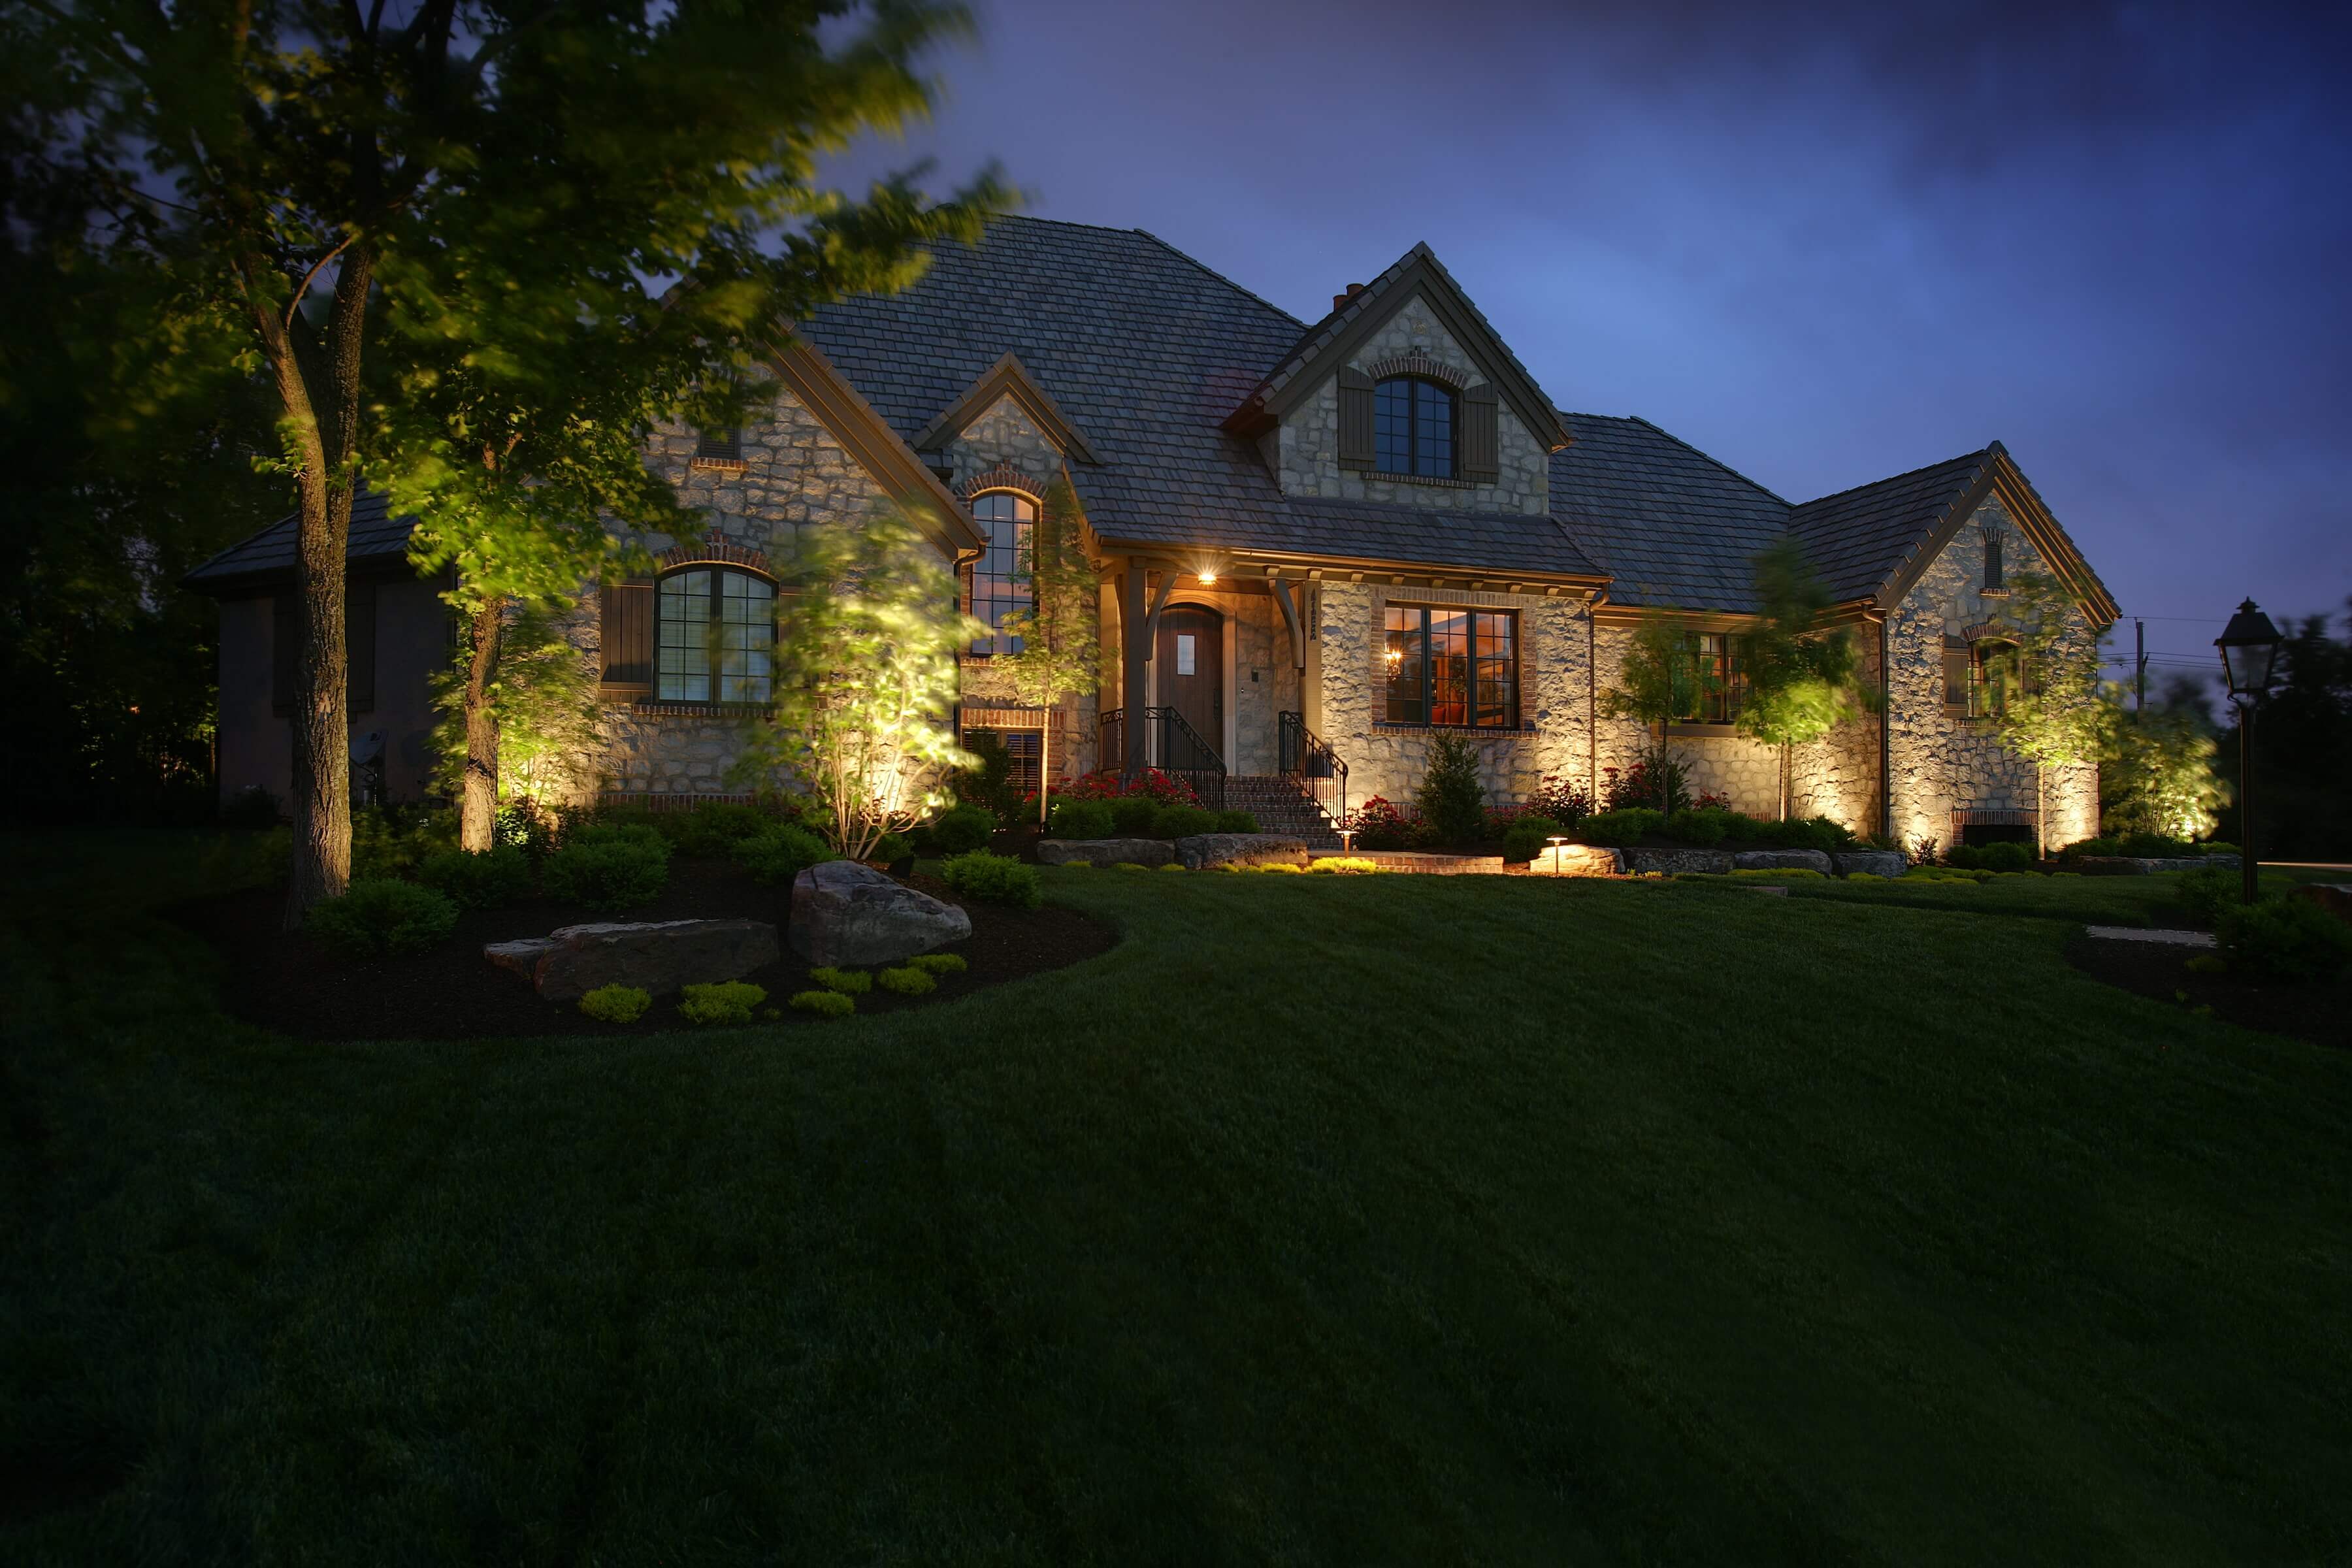 After image of home with lighting